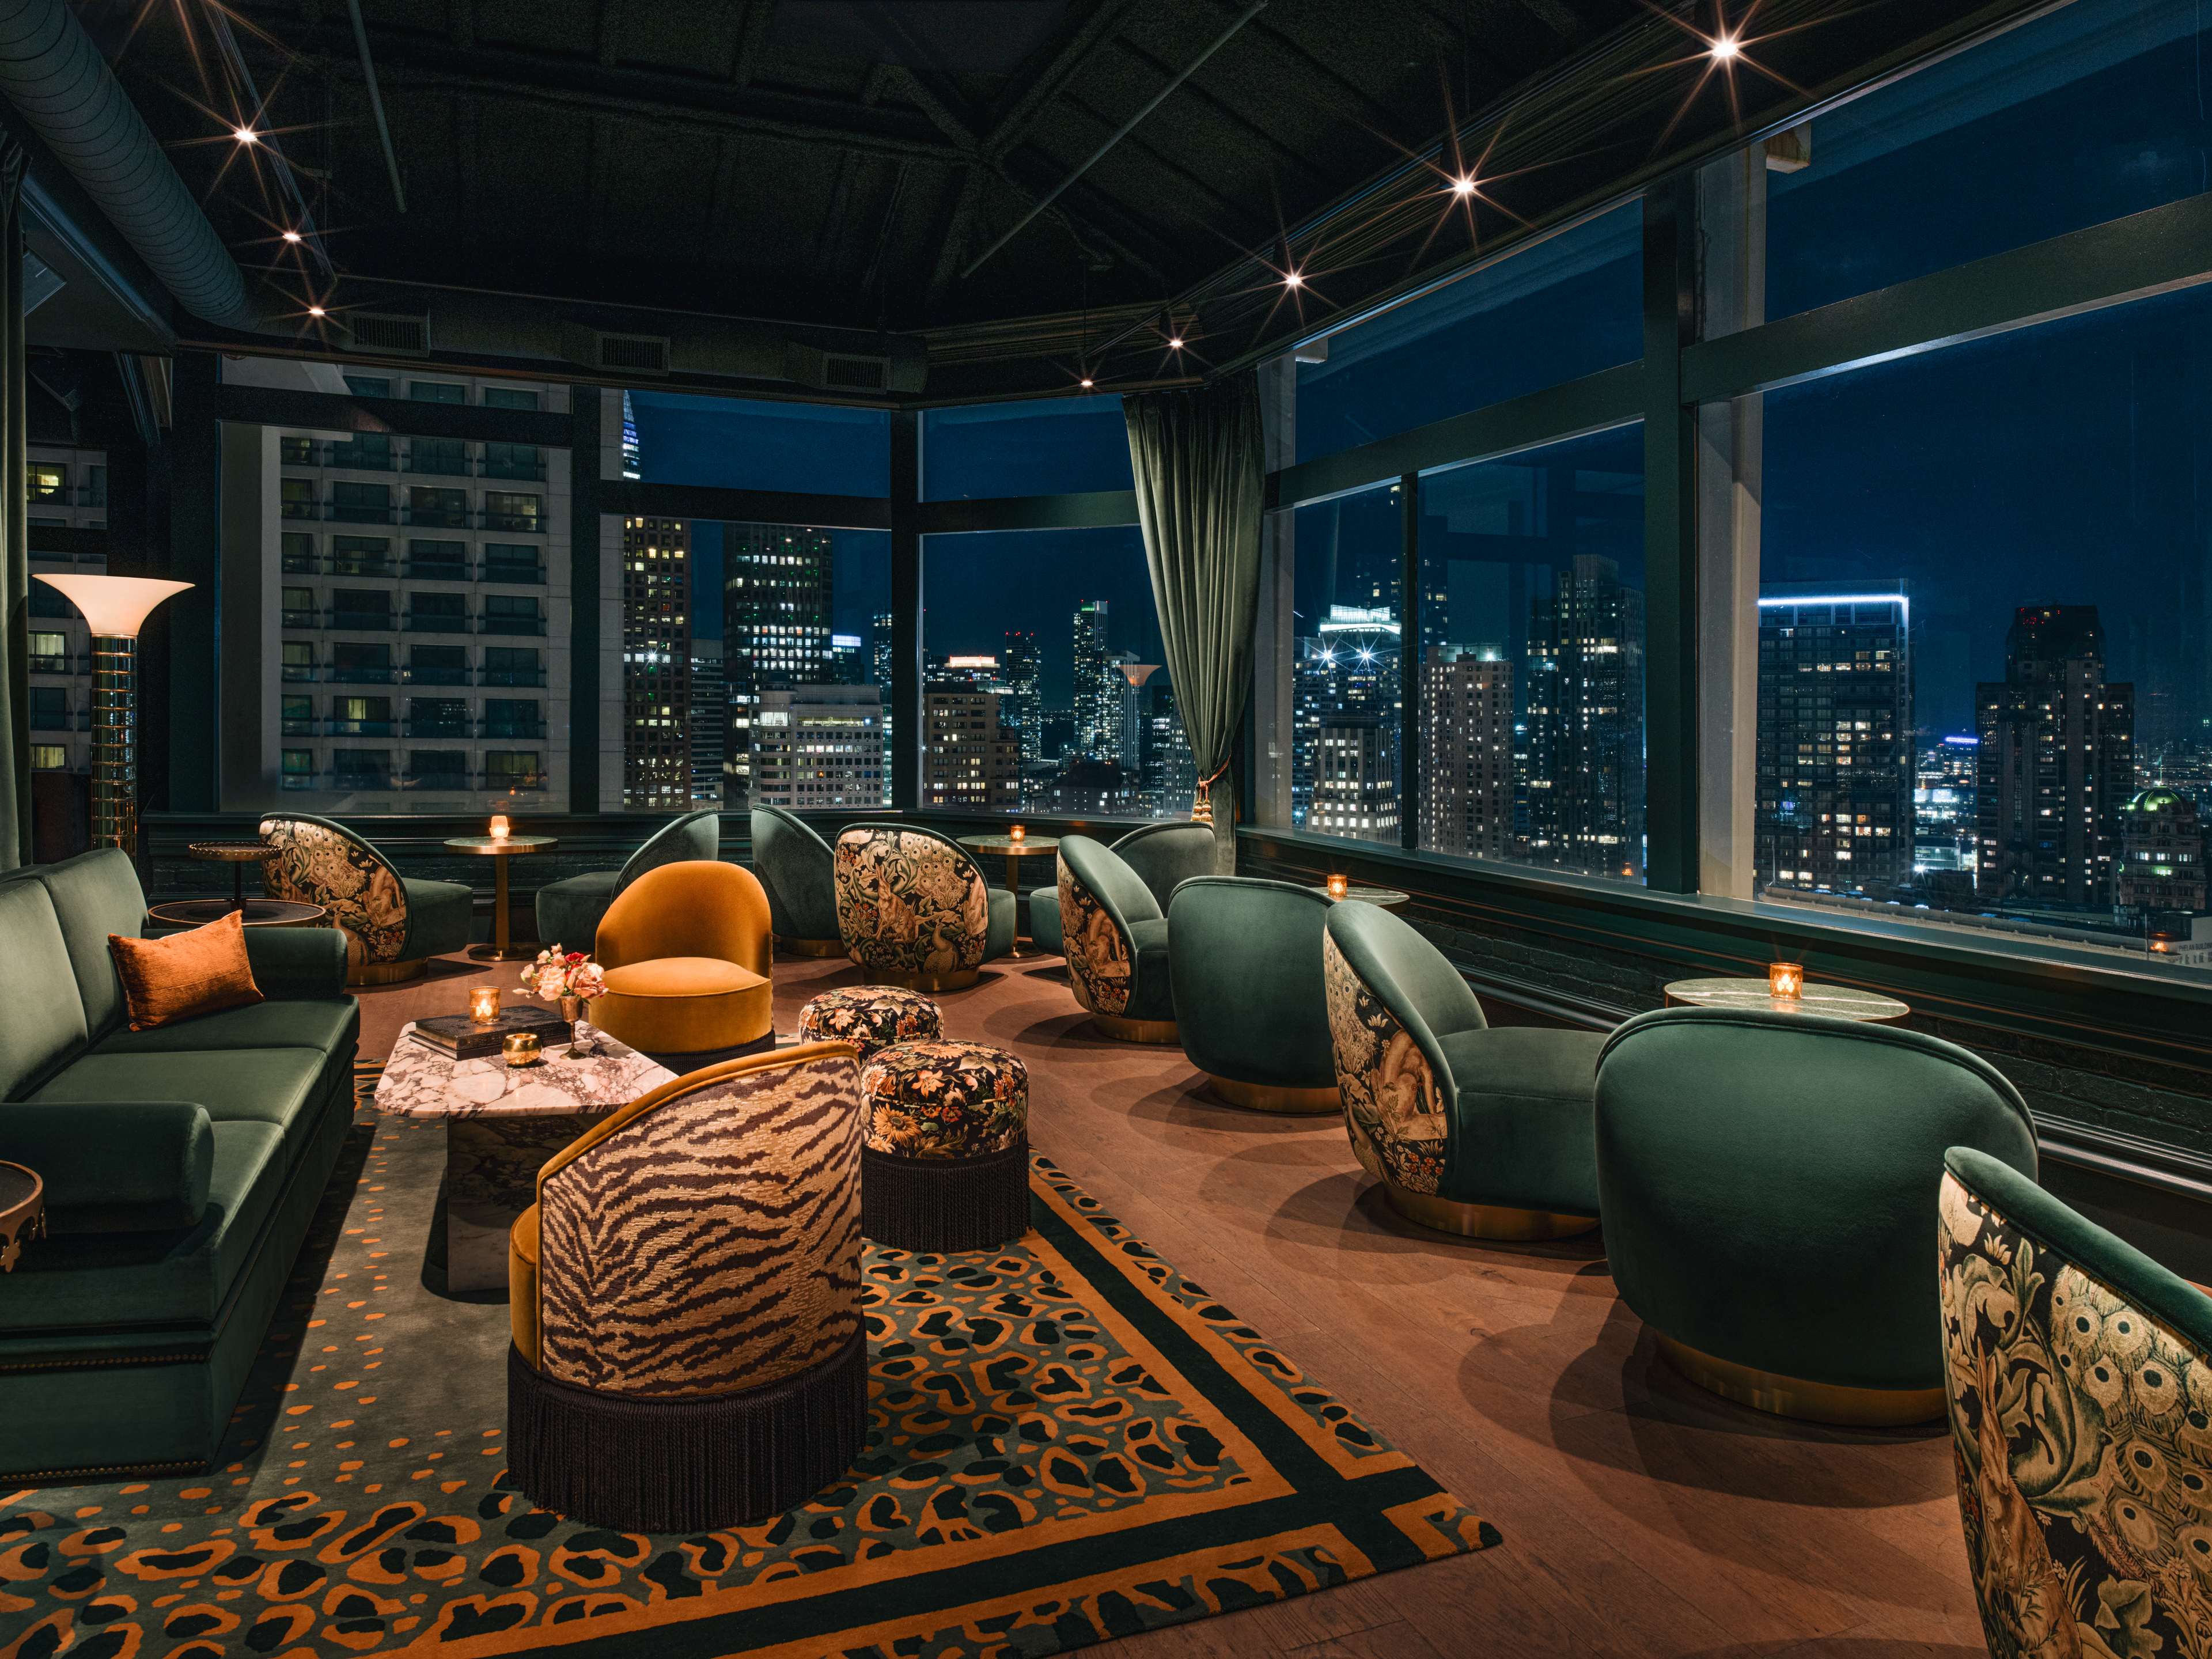 nighttime shot of 21st floor bar with velvet furniture and views of lit up San Francisco